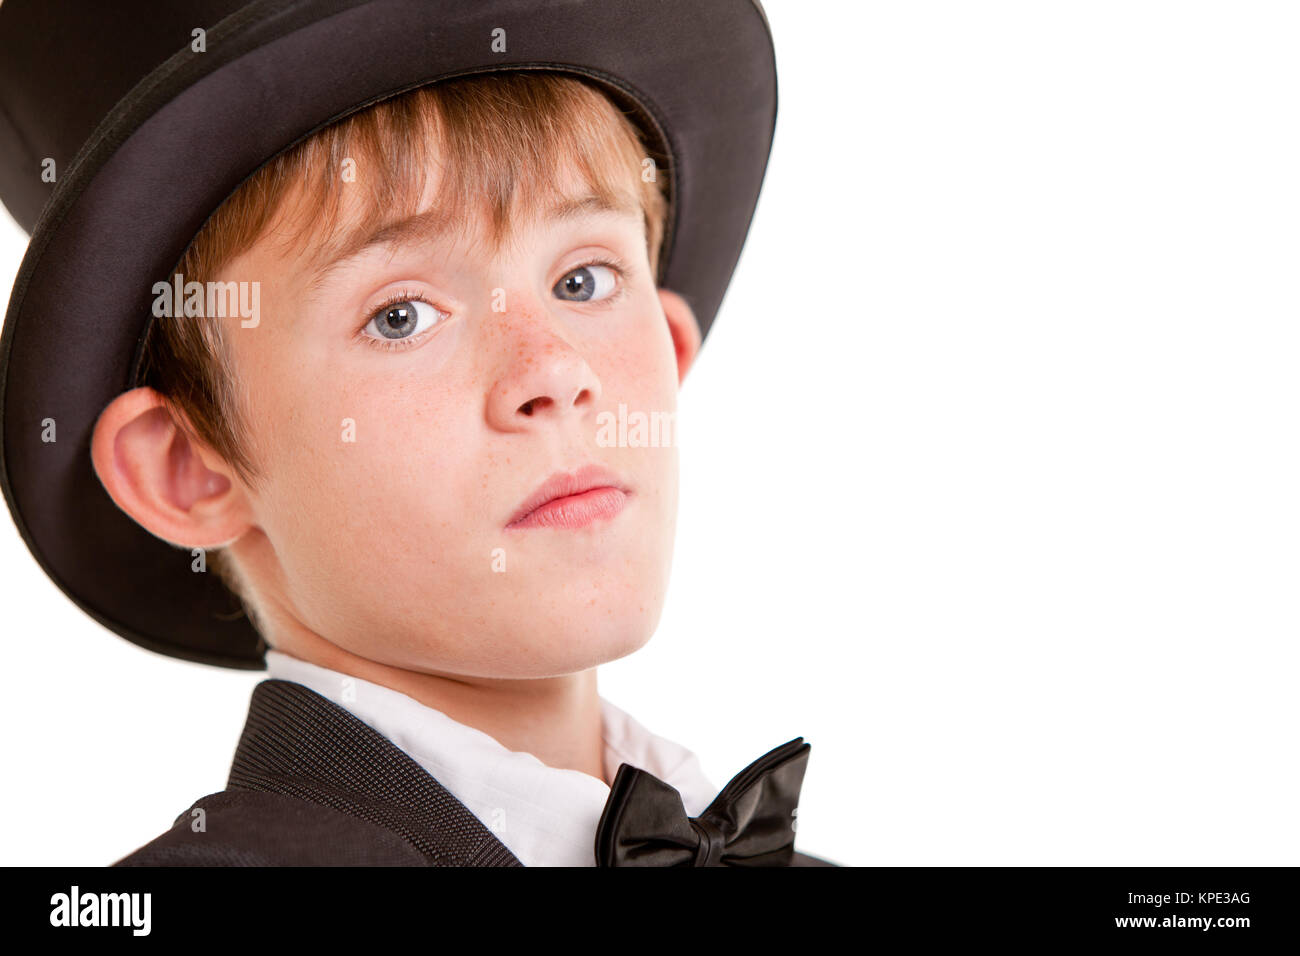 Confident Boy in Formal Wear with Top Hat Stock Photo